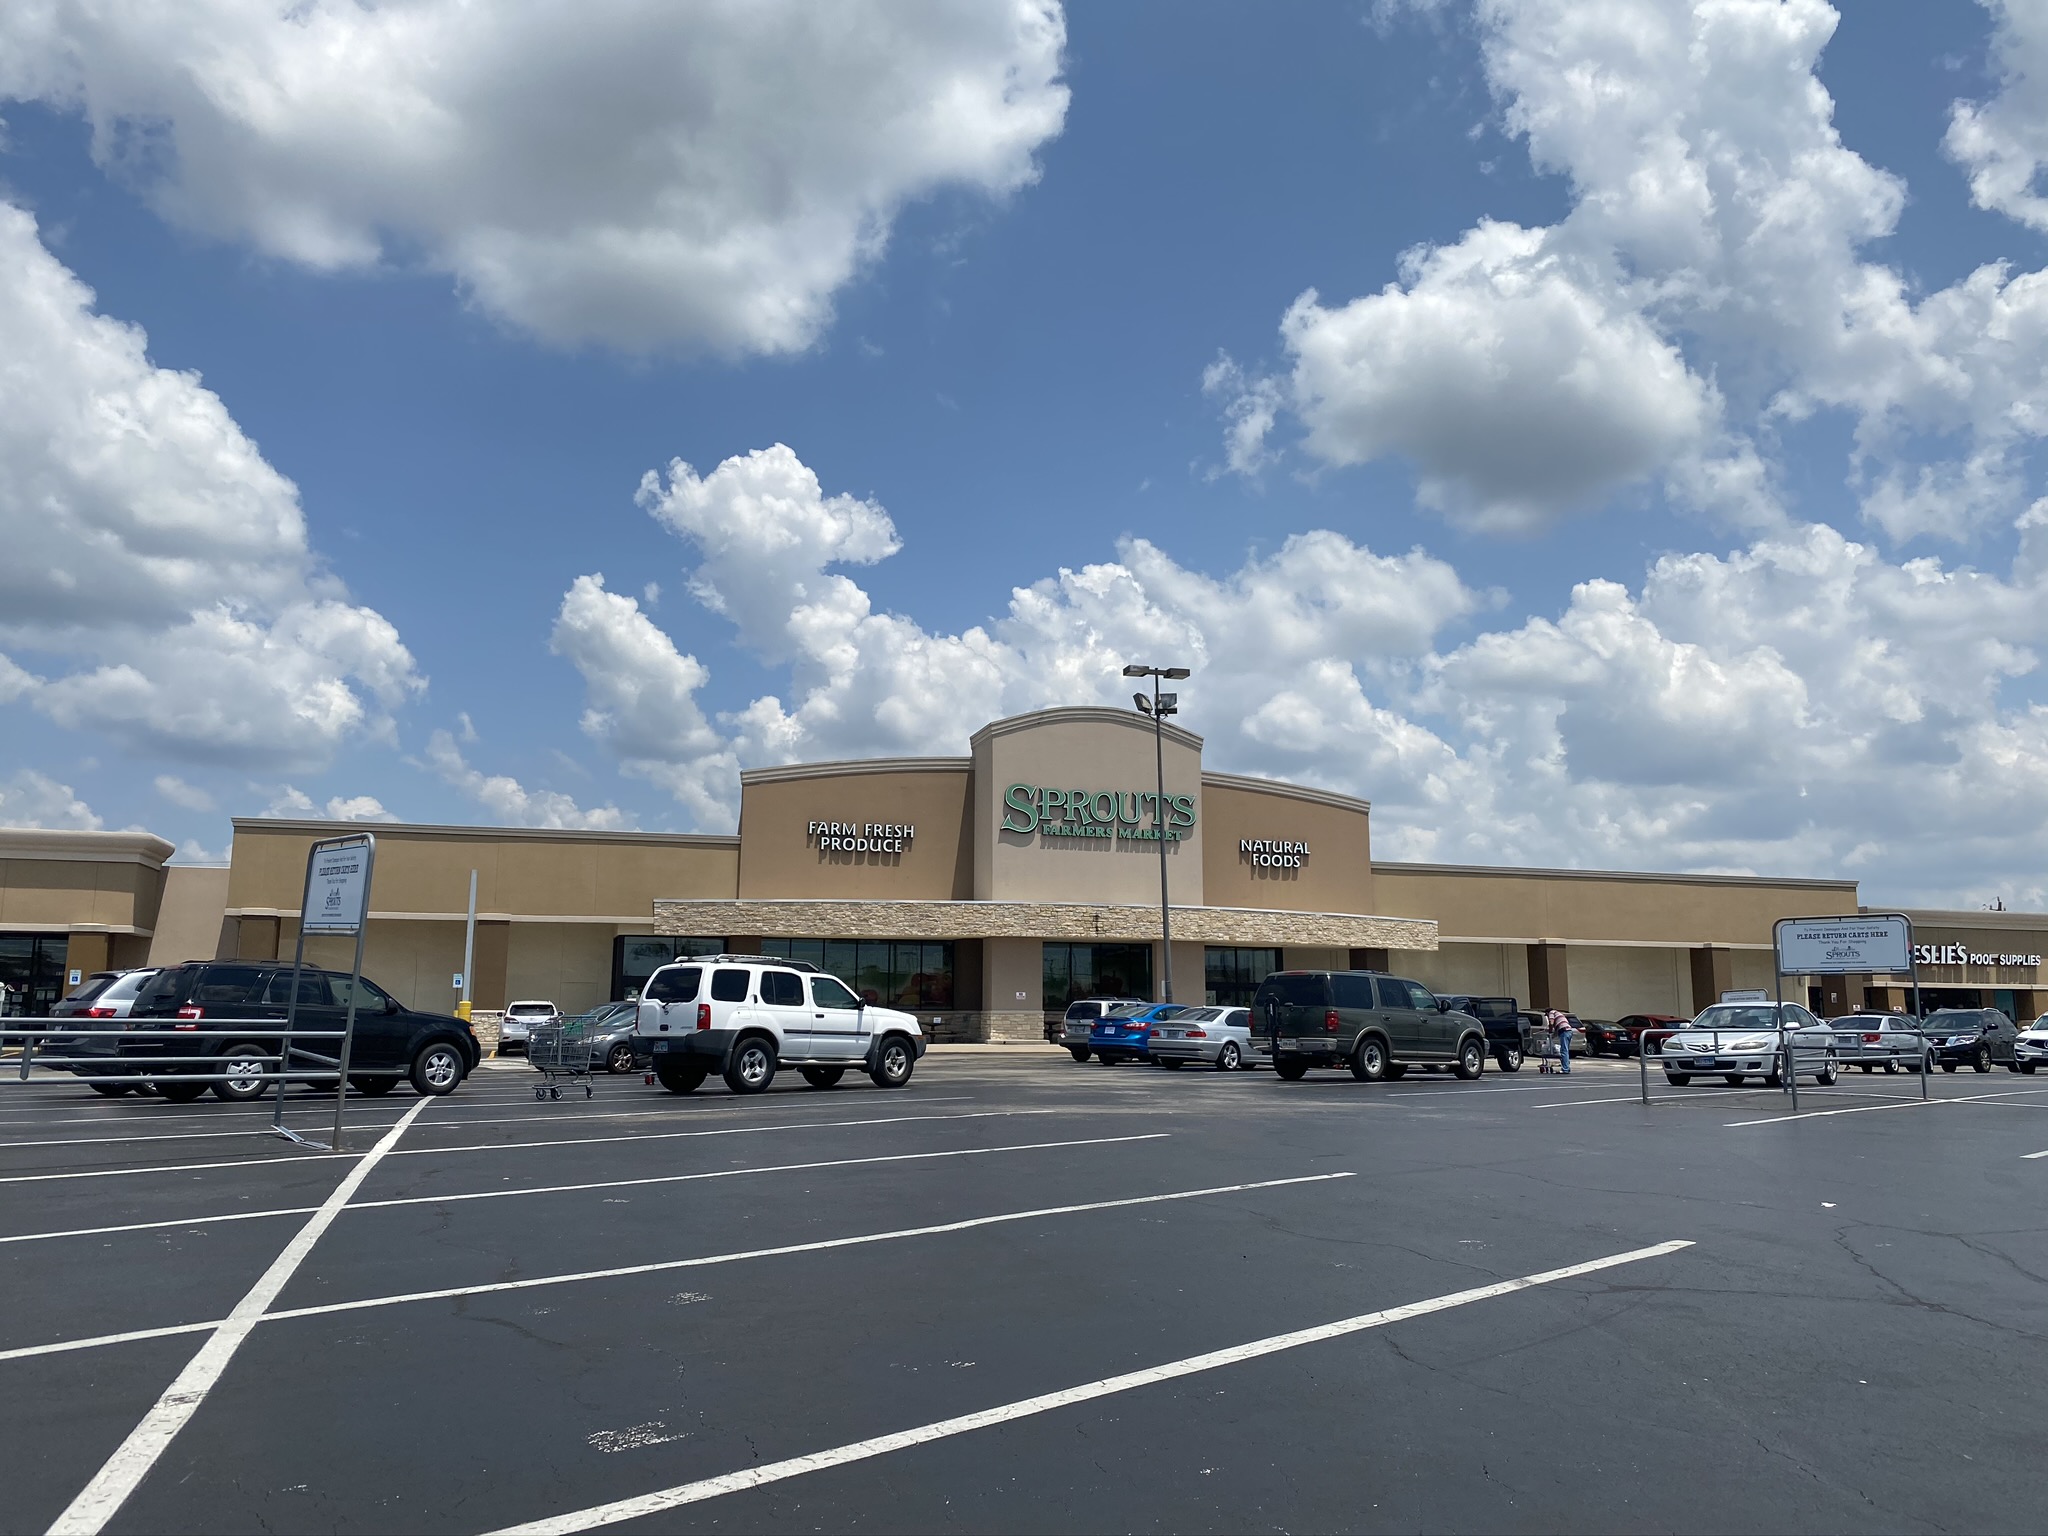 STEIN MART - CLOSED  86 Photos - 21155 Tomball Pkwy, Houston